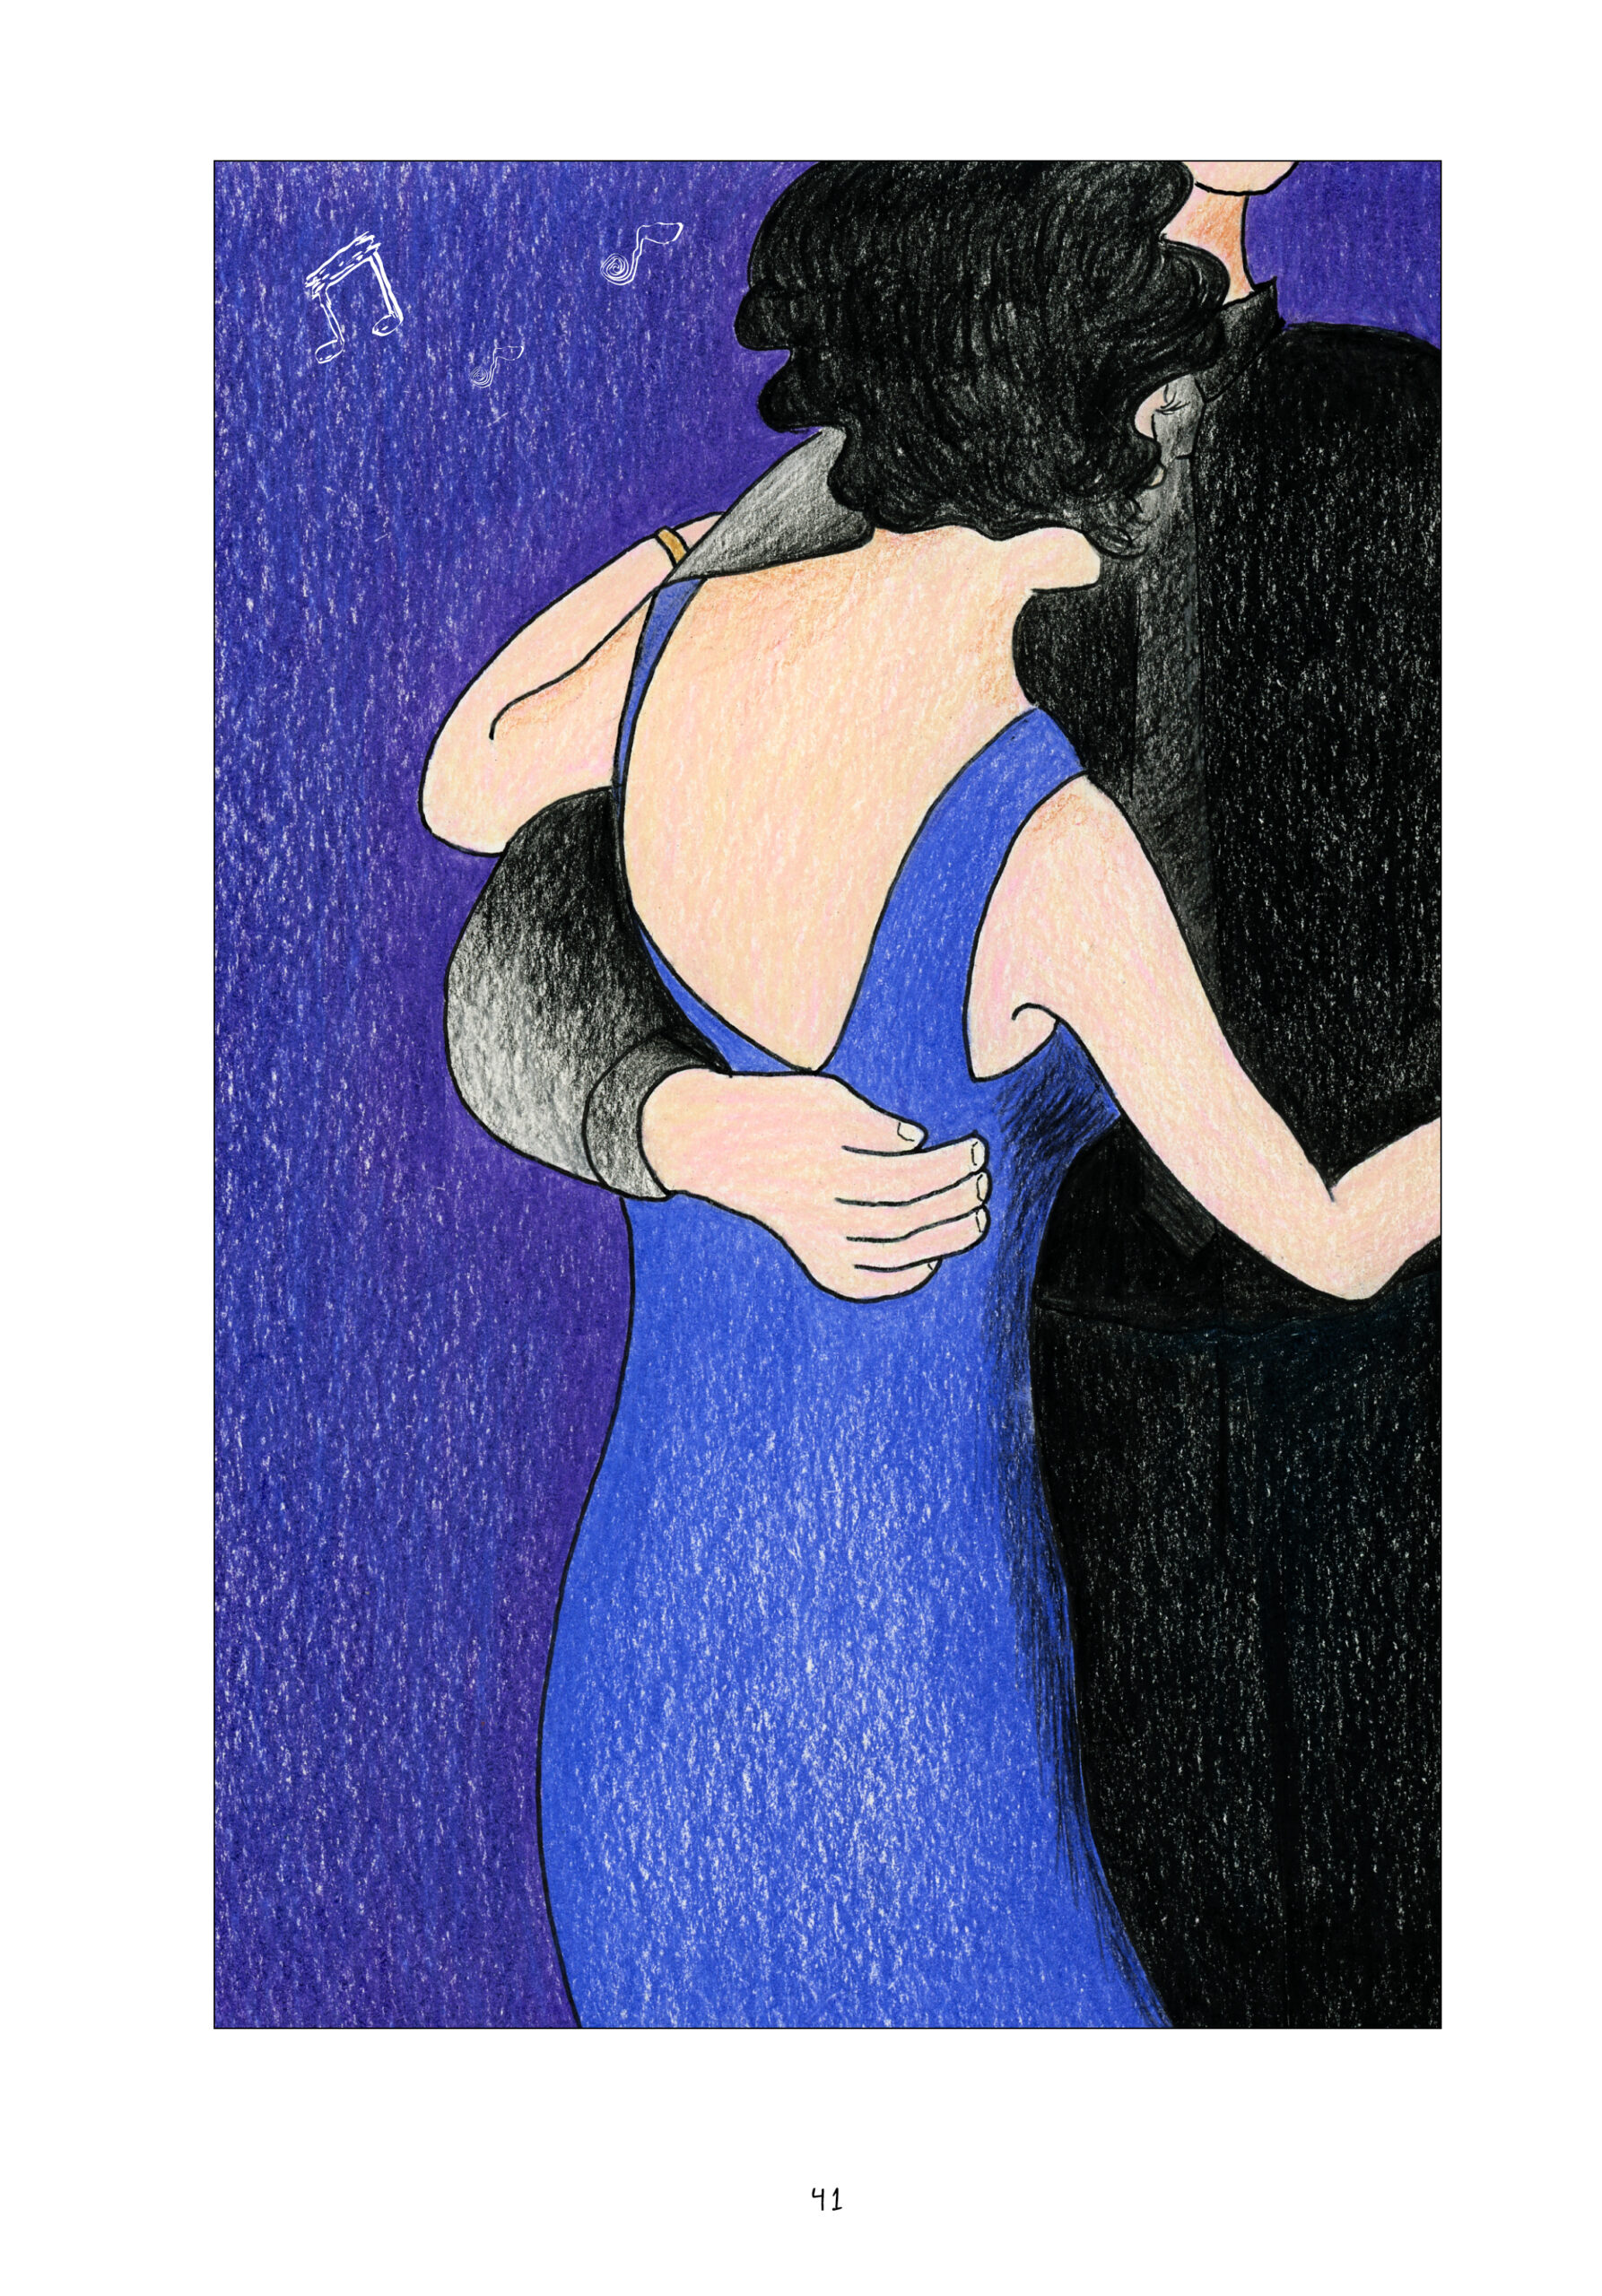 Another full page spread of Lorraine slow dancing, now with a man in all black. Her back Is turned to the reader. They hold each other close.